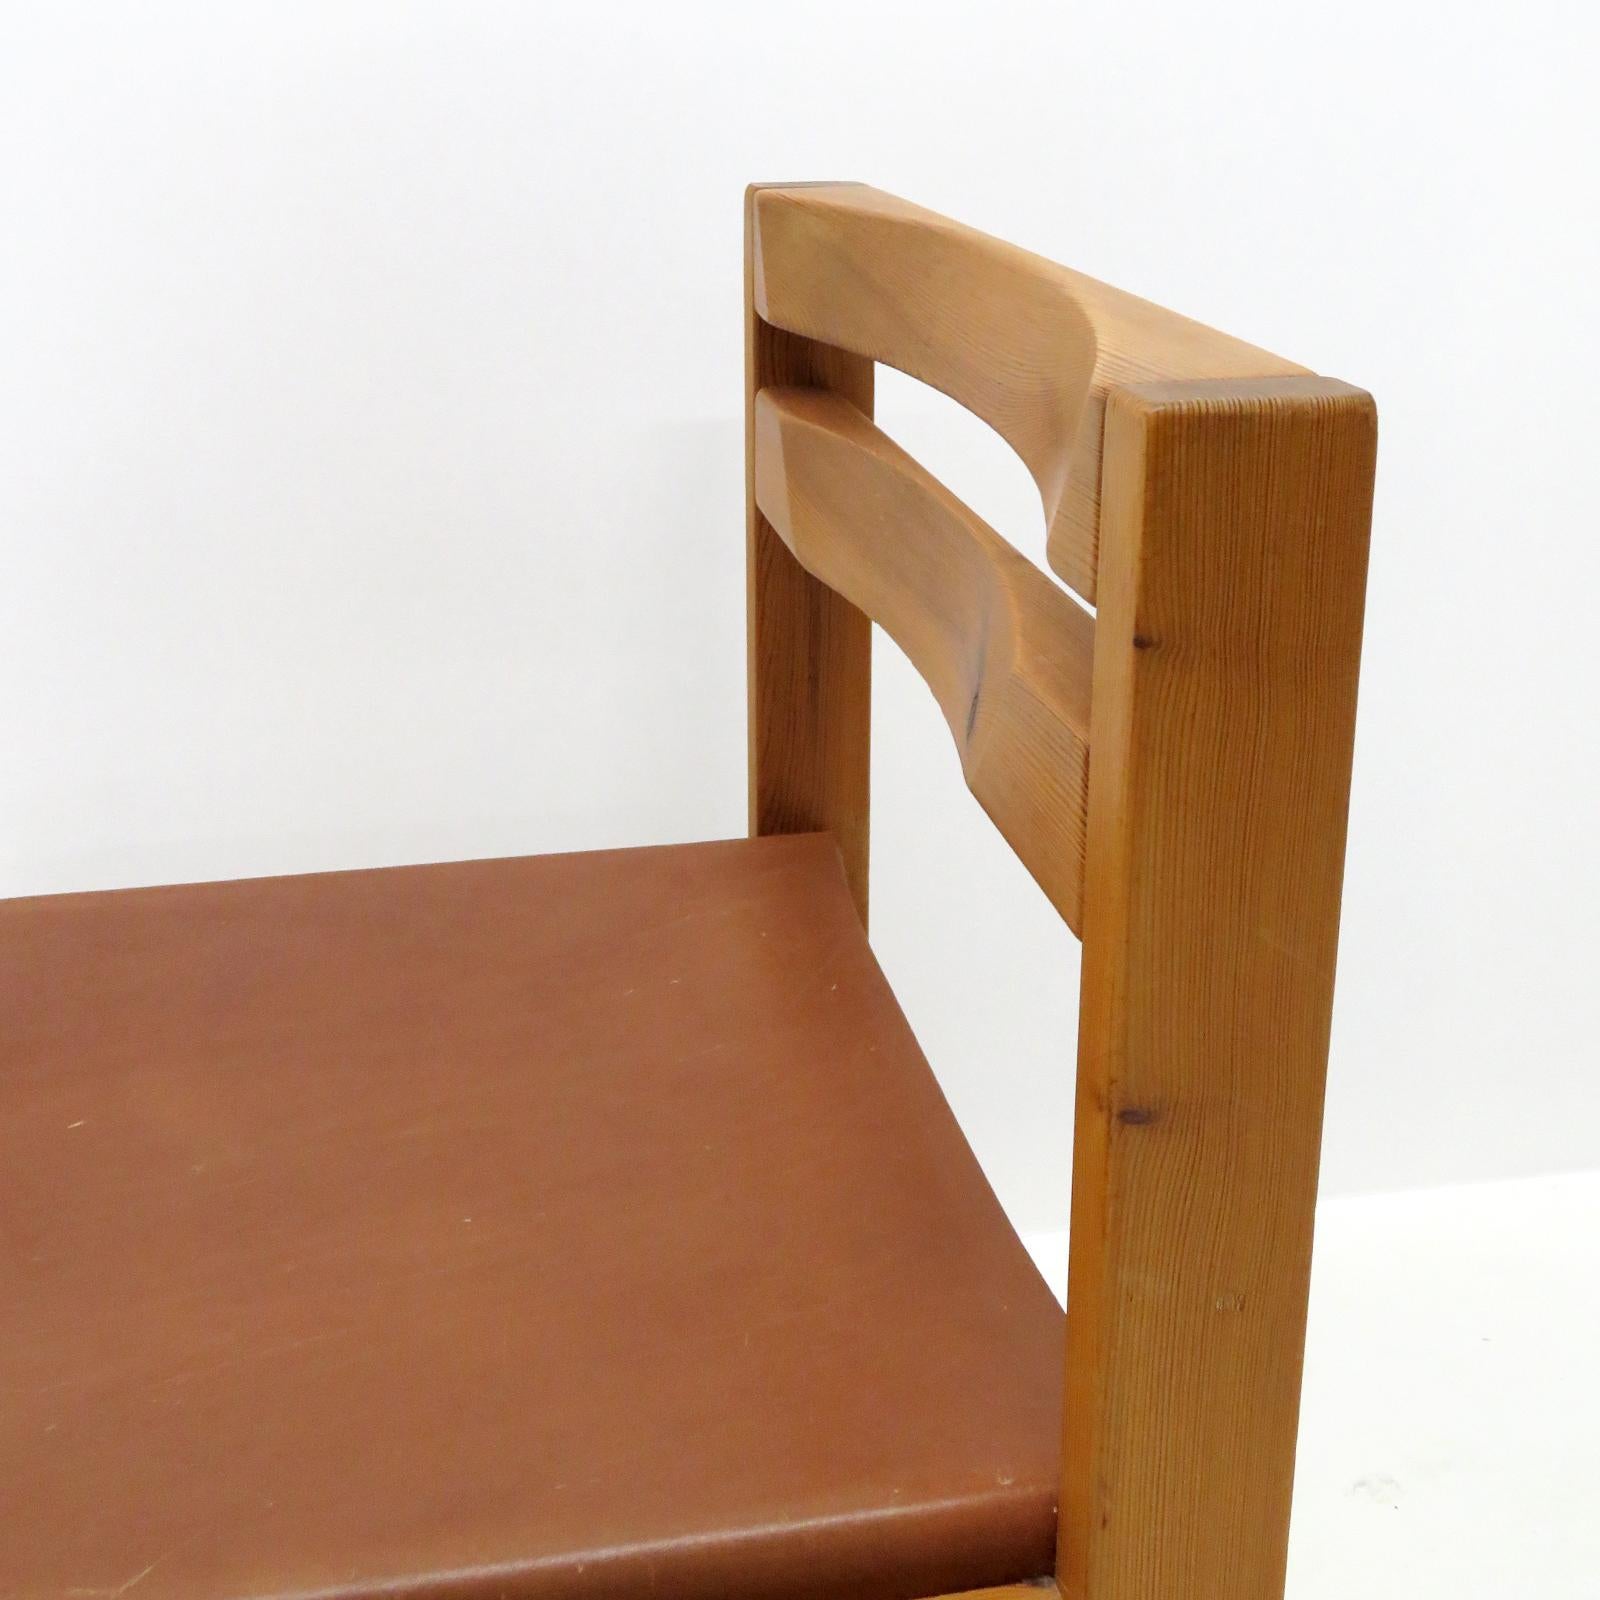 Late 20th Century Pine and Leather Dining Chair by Knud Færch for Sorø Stolefabrik, 1970 For Sale